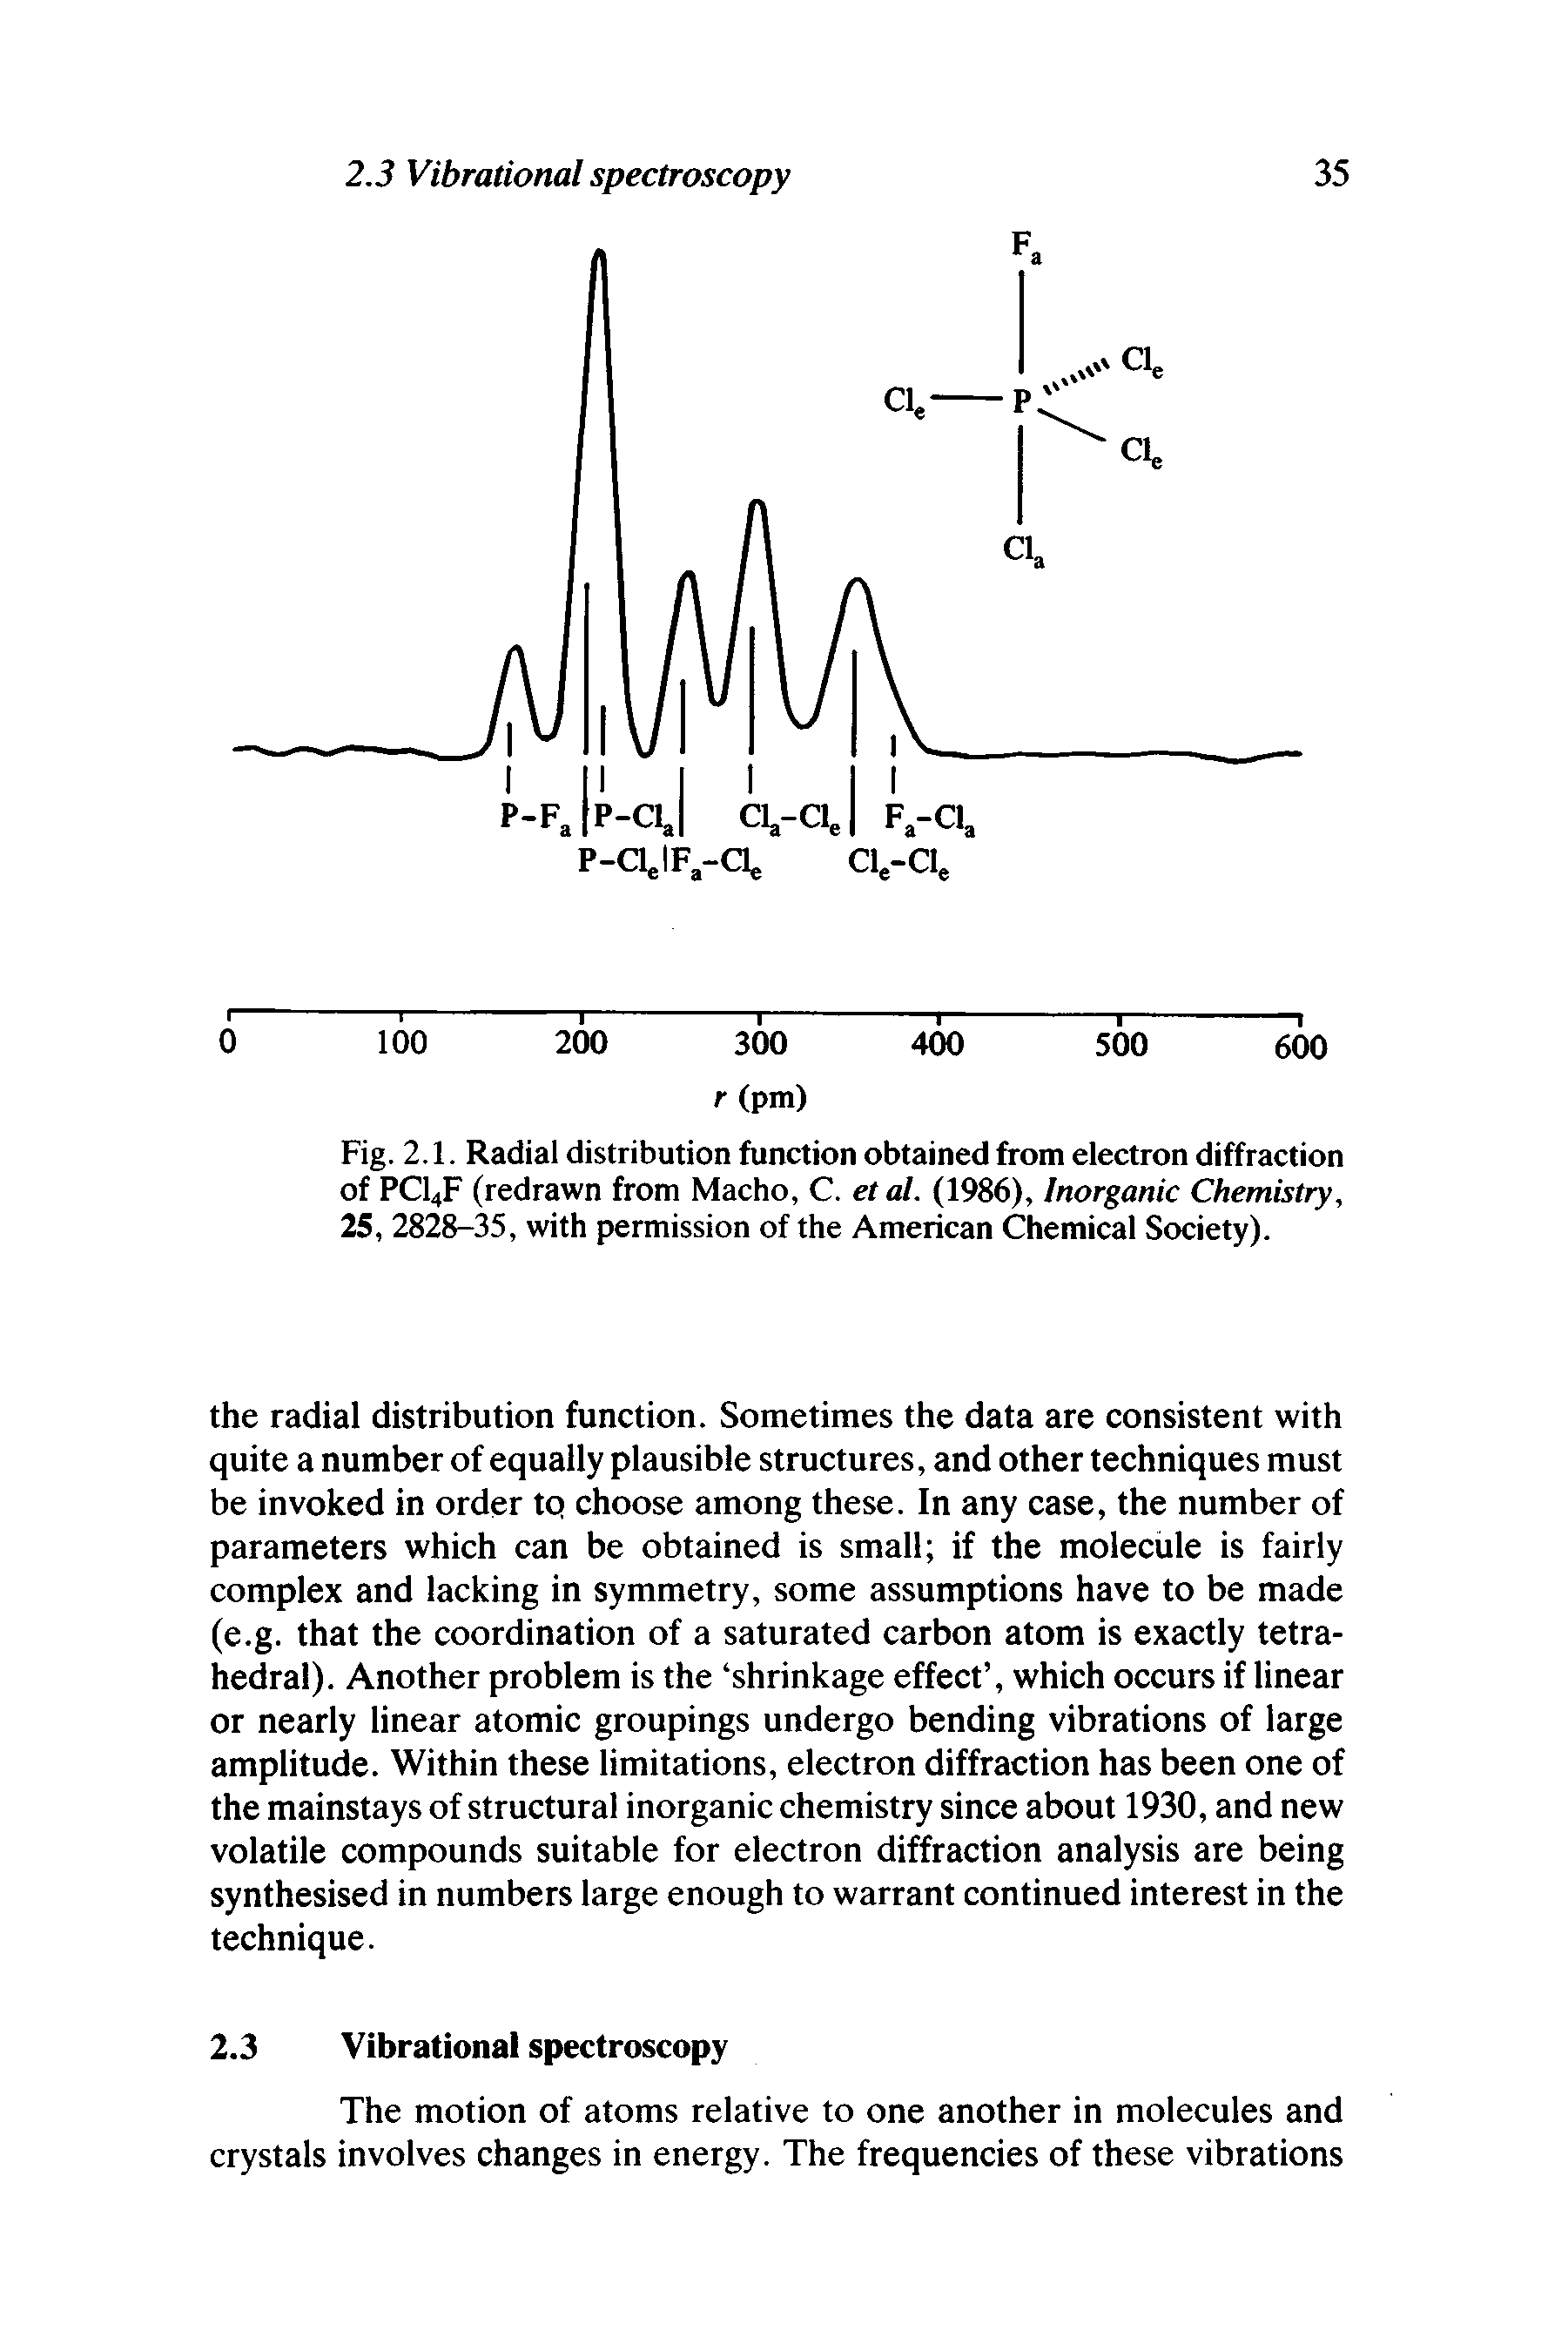 Fig. 2.1. Radial distribution function obtained from electron diffraction of PC14F (redrawn from Macho, C. etal. (1986), Inorganic Chemistry, 25, 2828-35, with permission of the American Chemical Society).